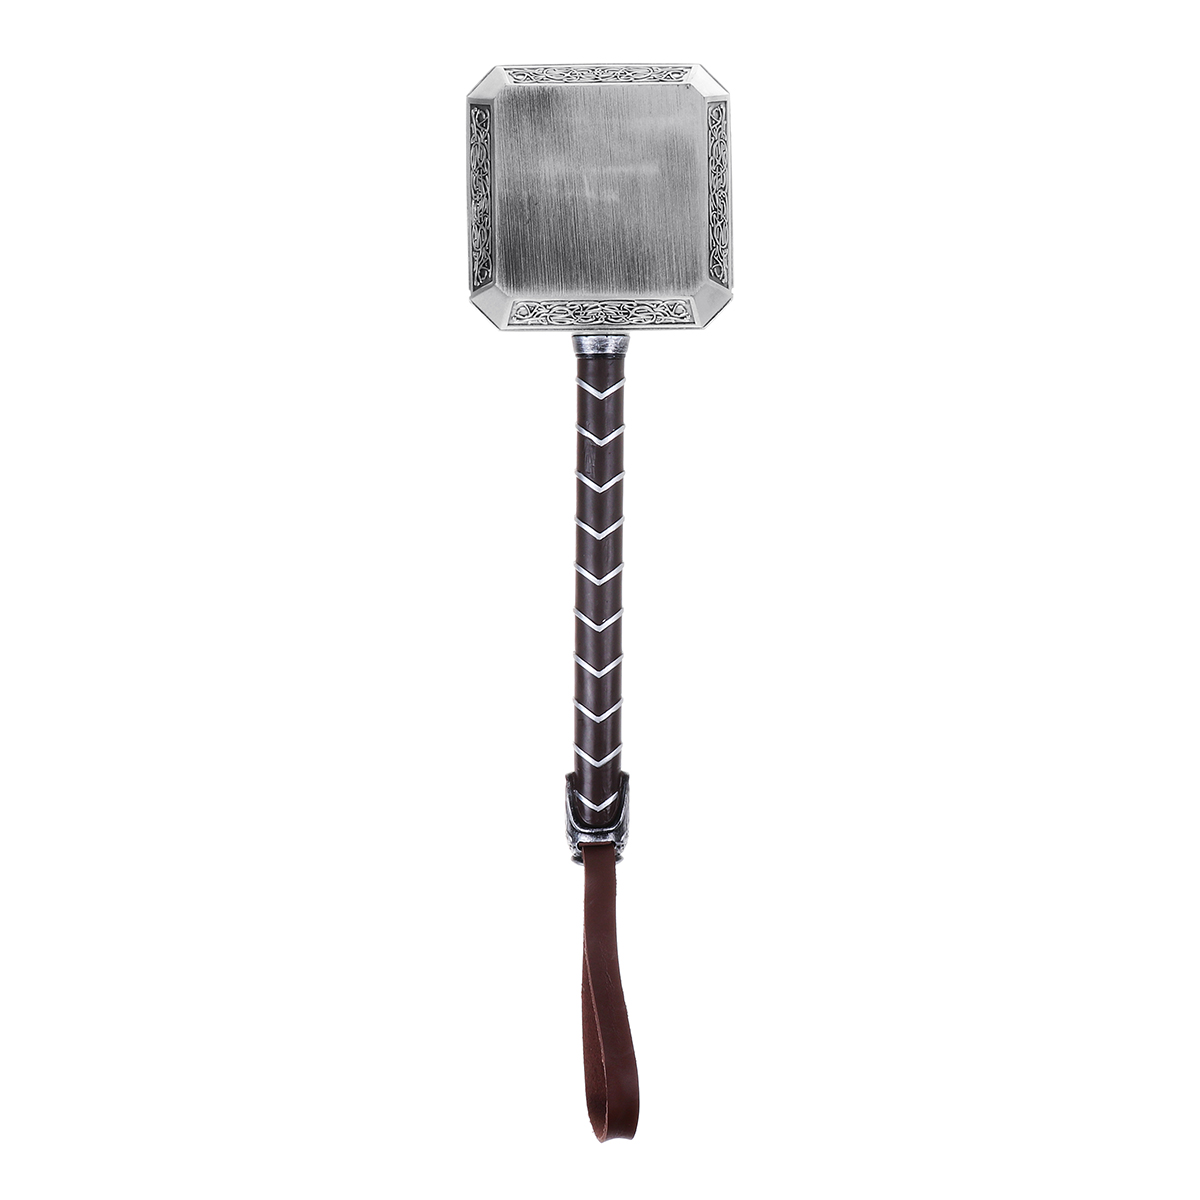 2KG-Thunder-Hammers-For-Movie-Prop-1462099